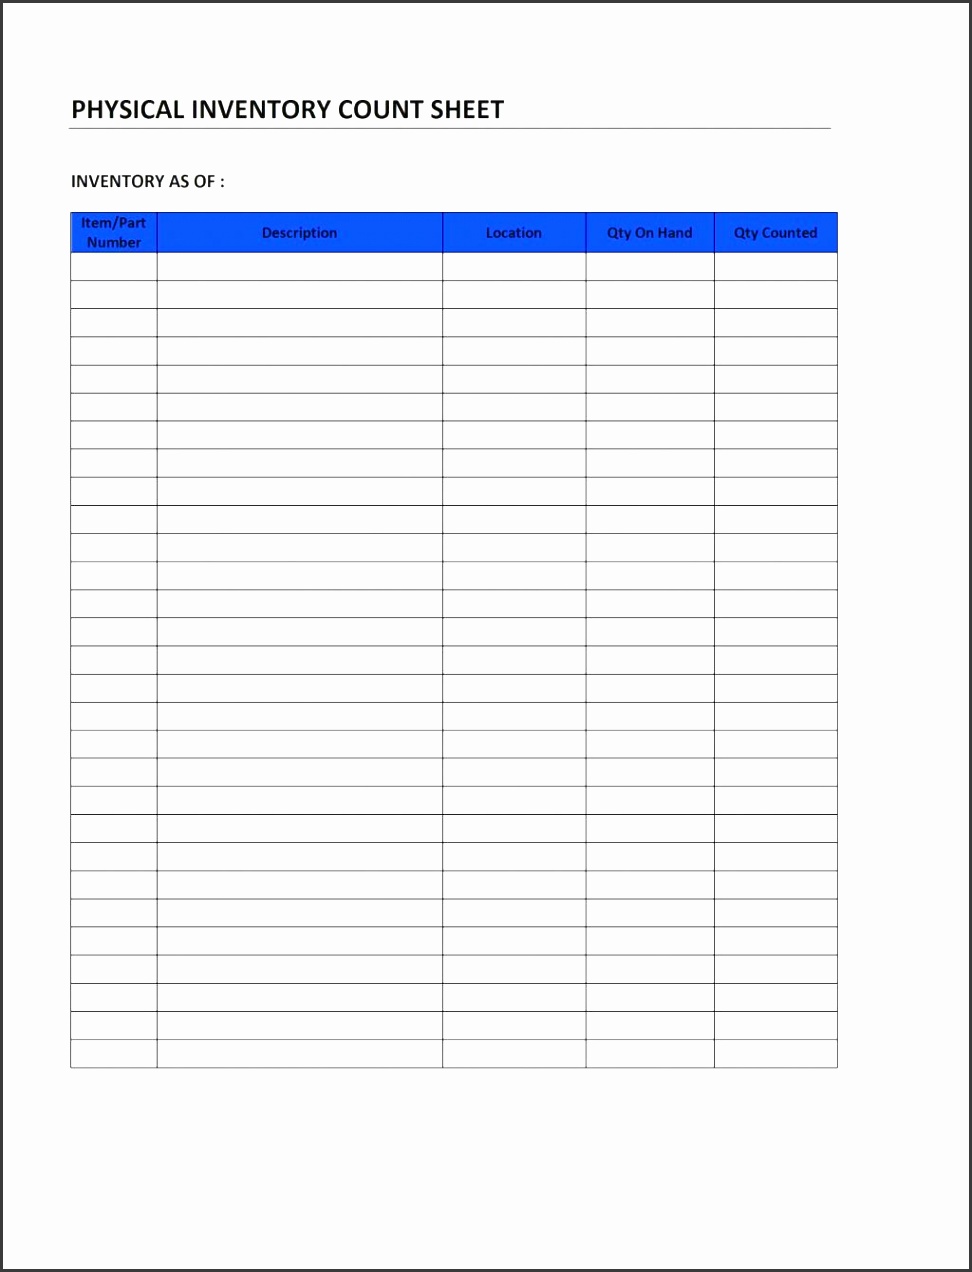 business inventory checklist physical counting sheet template sample helloalive templates free spreadsheet printable forms